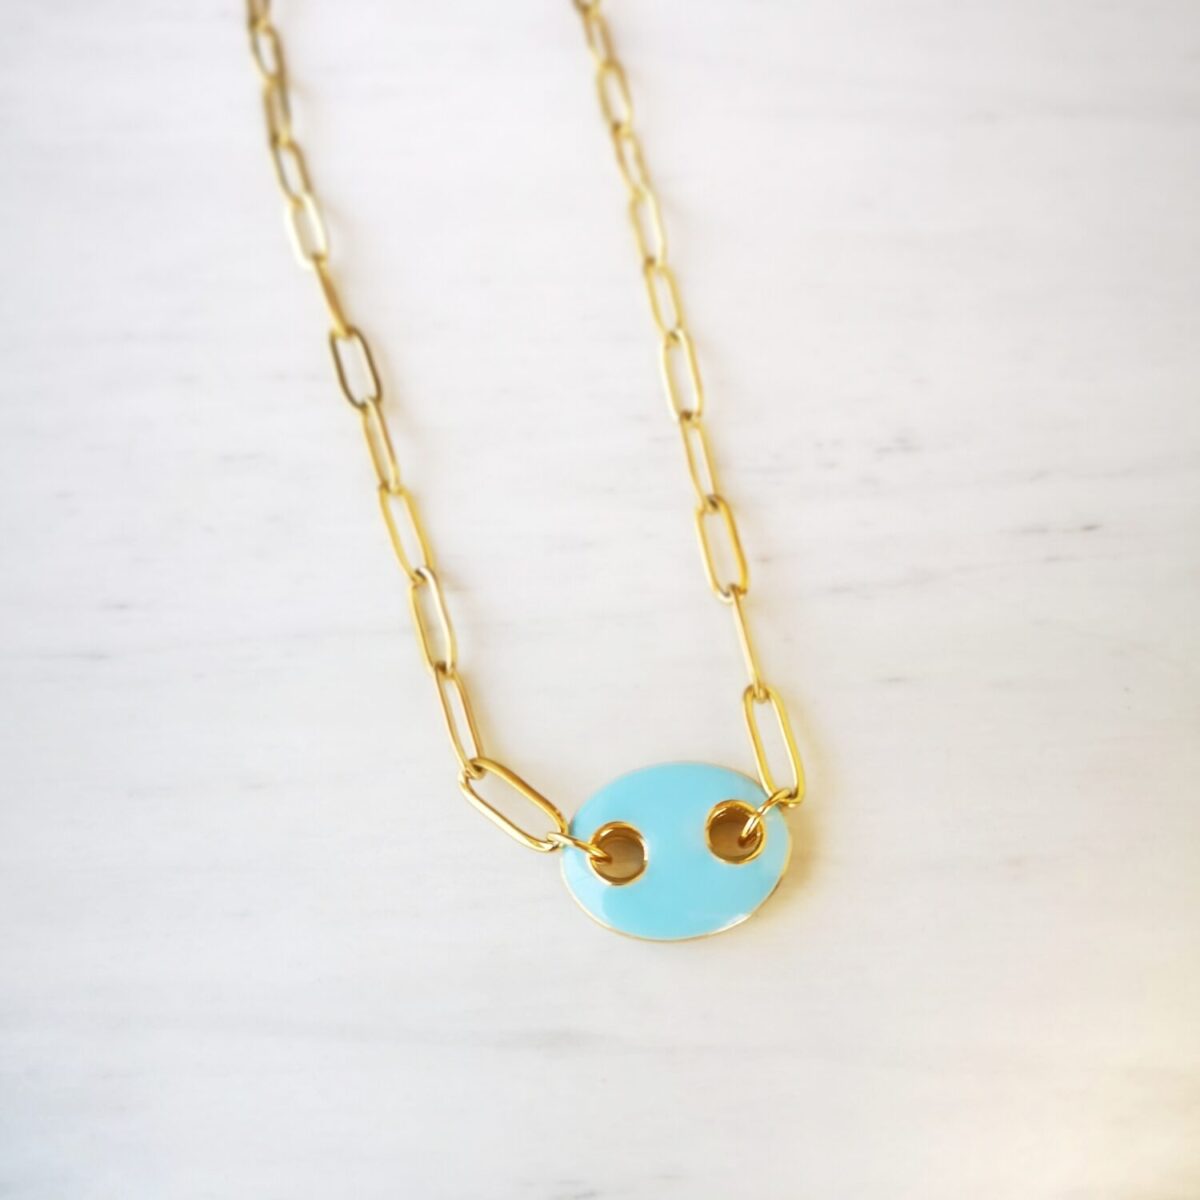 Turqoise Oval Necklace